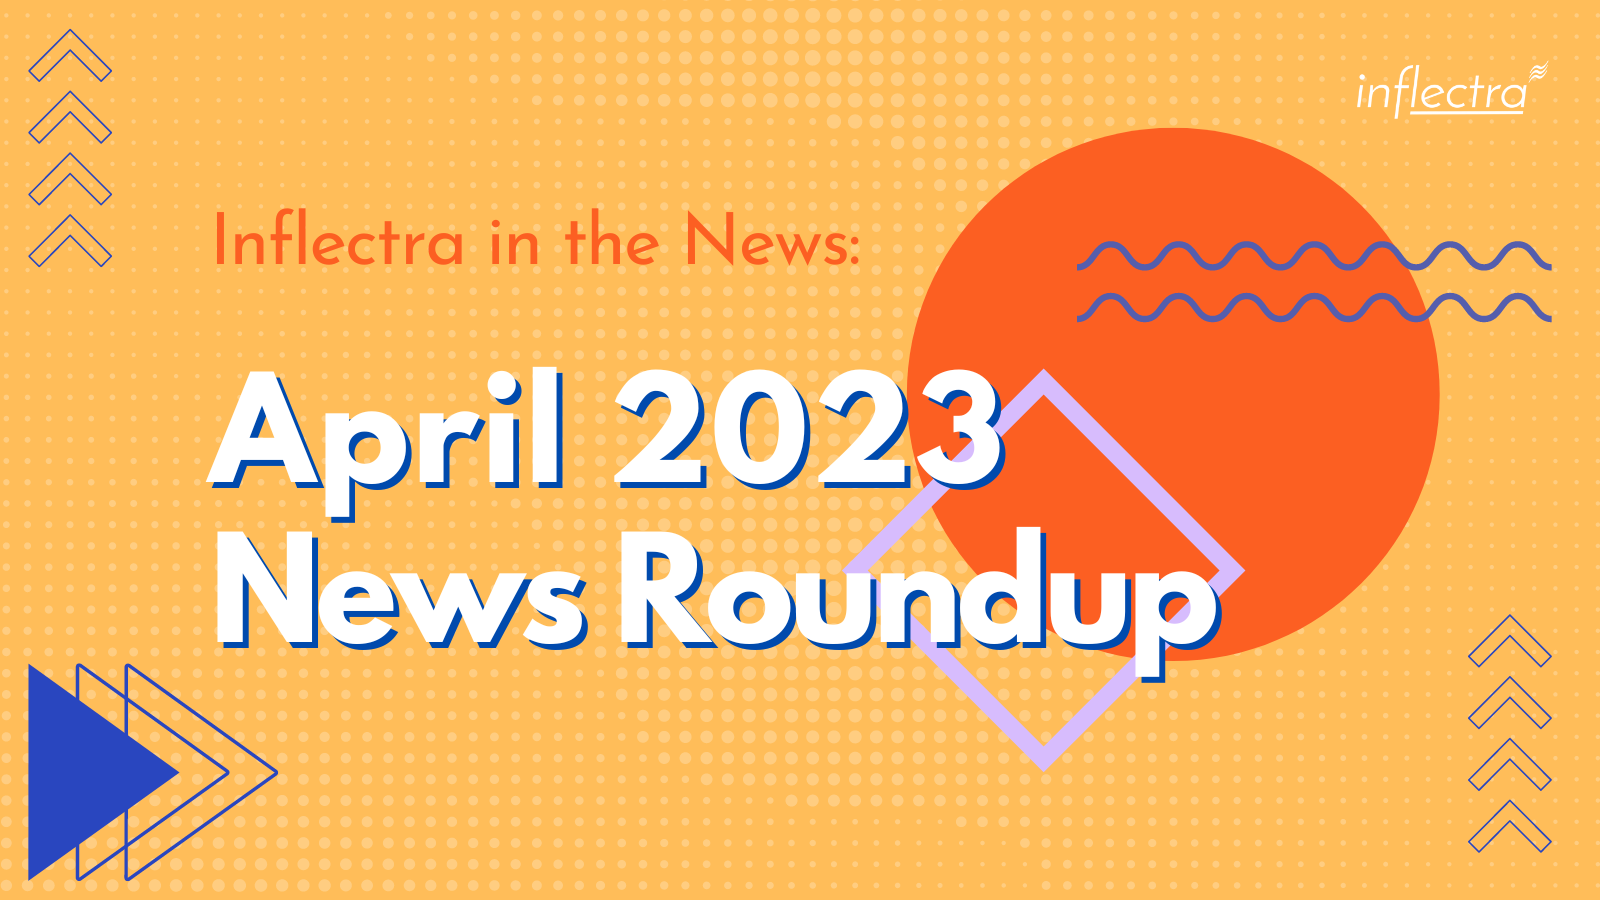 inflectra-in-the-news-april-roundup-image